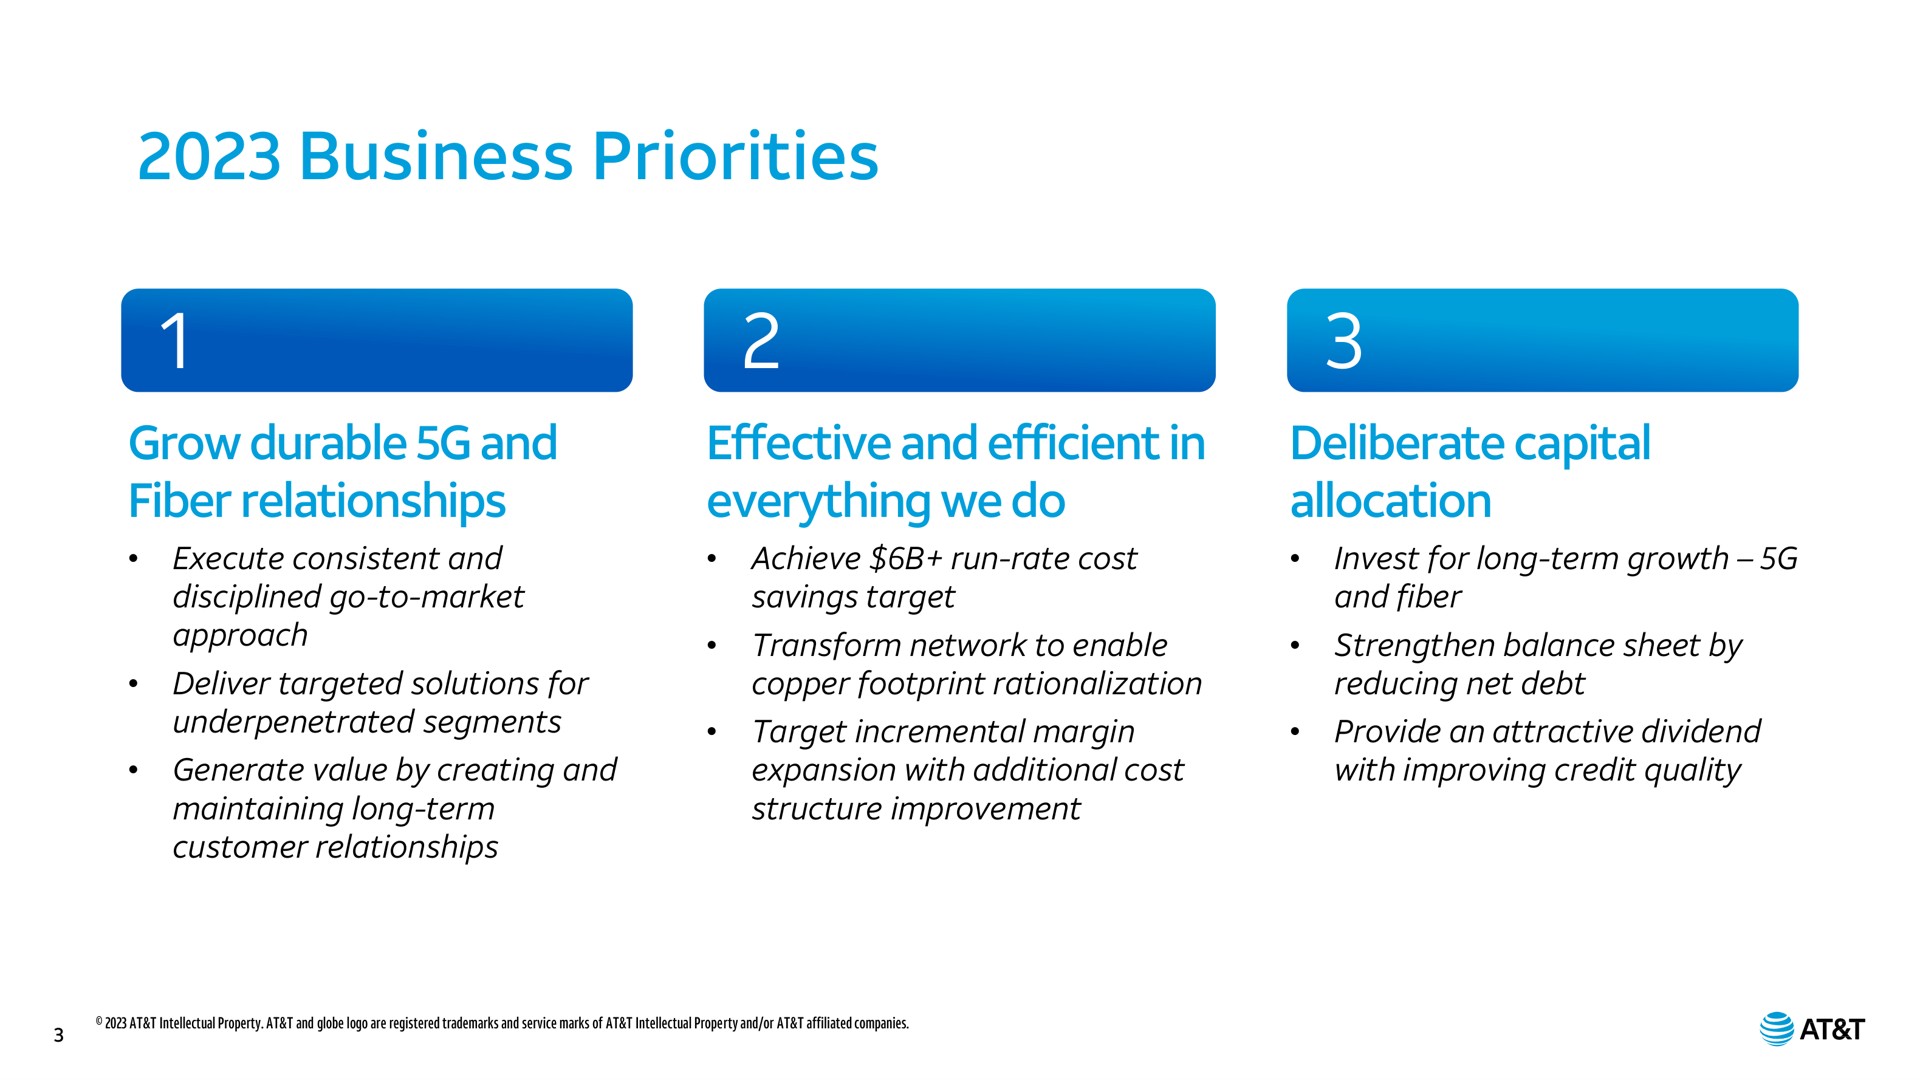 business priorities grow durable and fiber relationships effective and efficient in everything we do deliberate capital allocation segments target incremental margin | AT&T